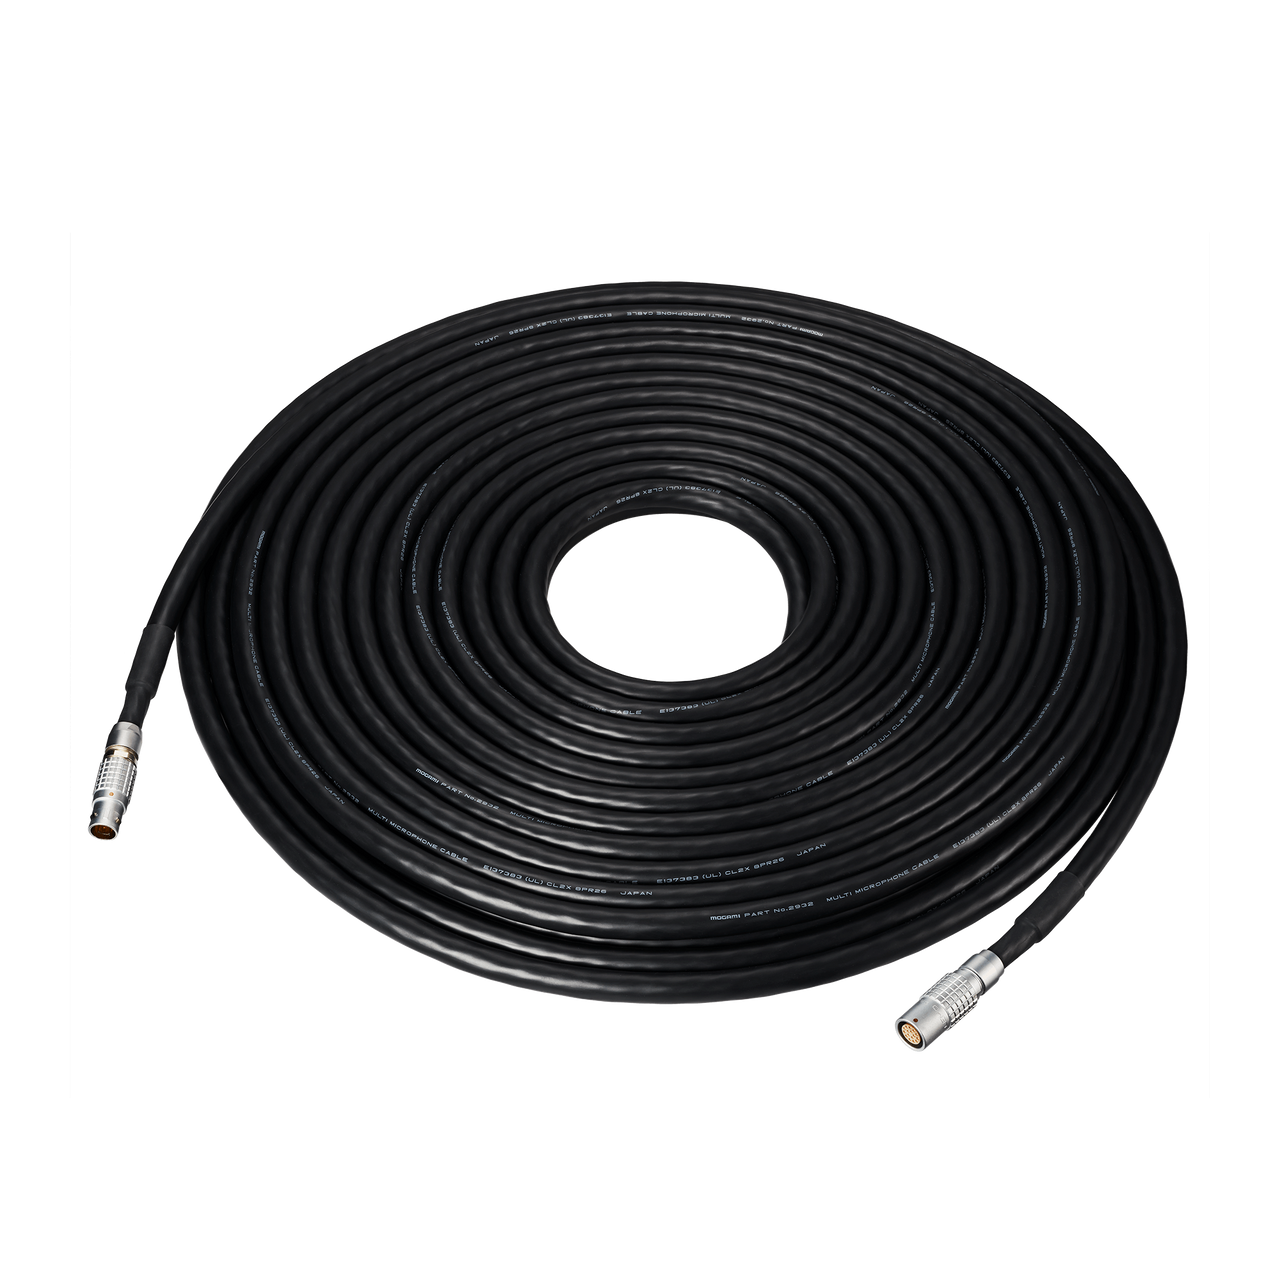 Audio-Technica BP3600/CABLE20EXT Optional 20 Meter Extension Cable for BP3600 (BP3600/CABLE20EXT)